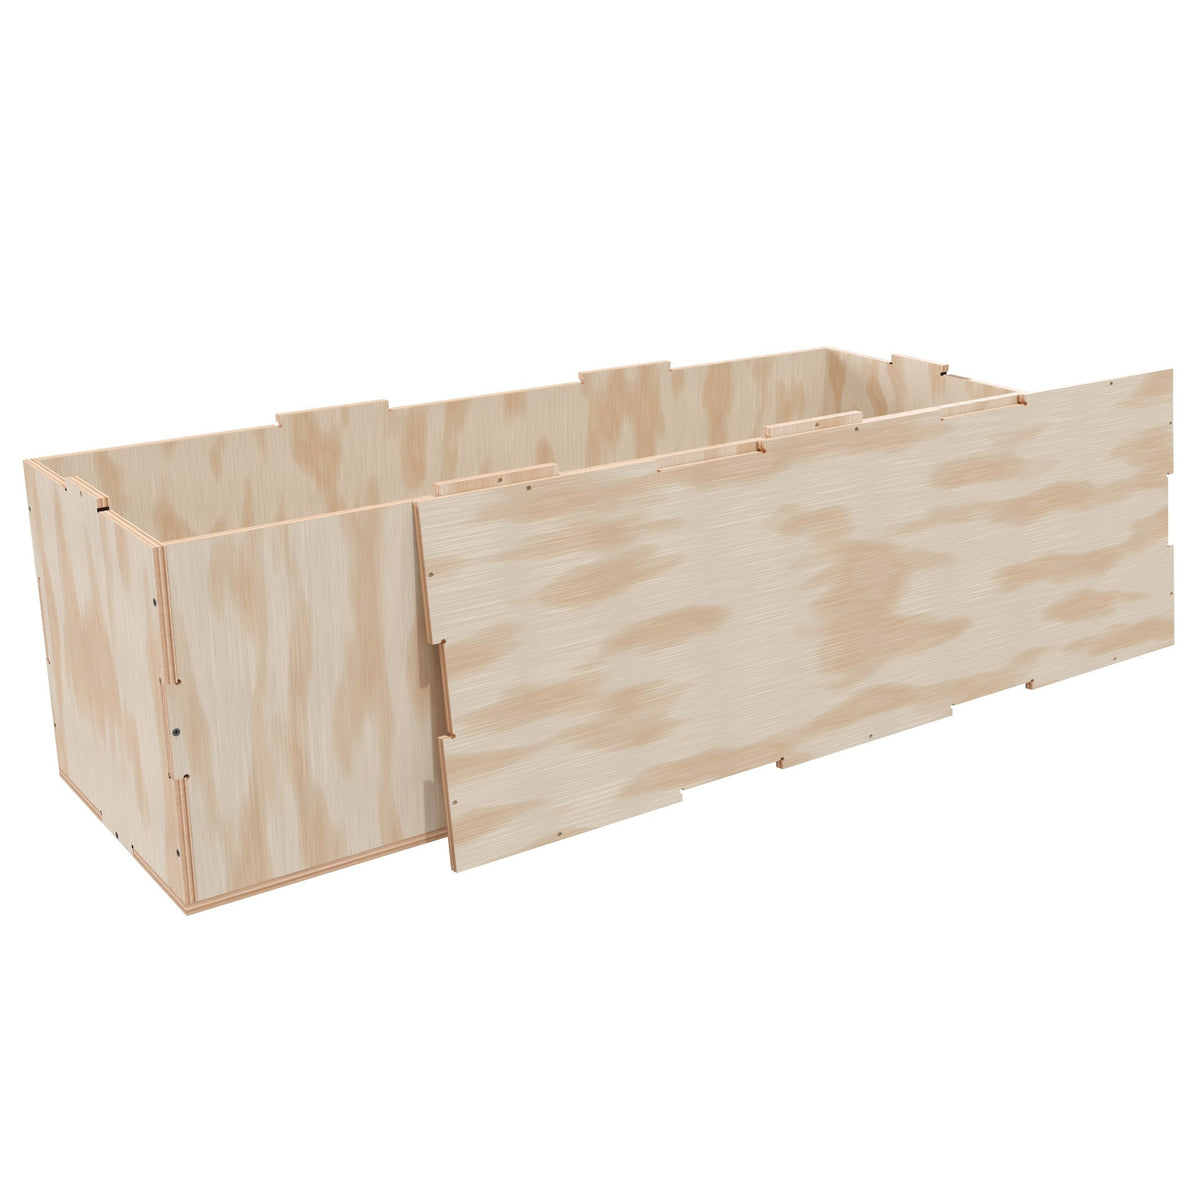 Plywood Shipping Crate 47x16x16